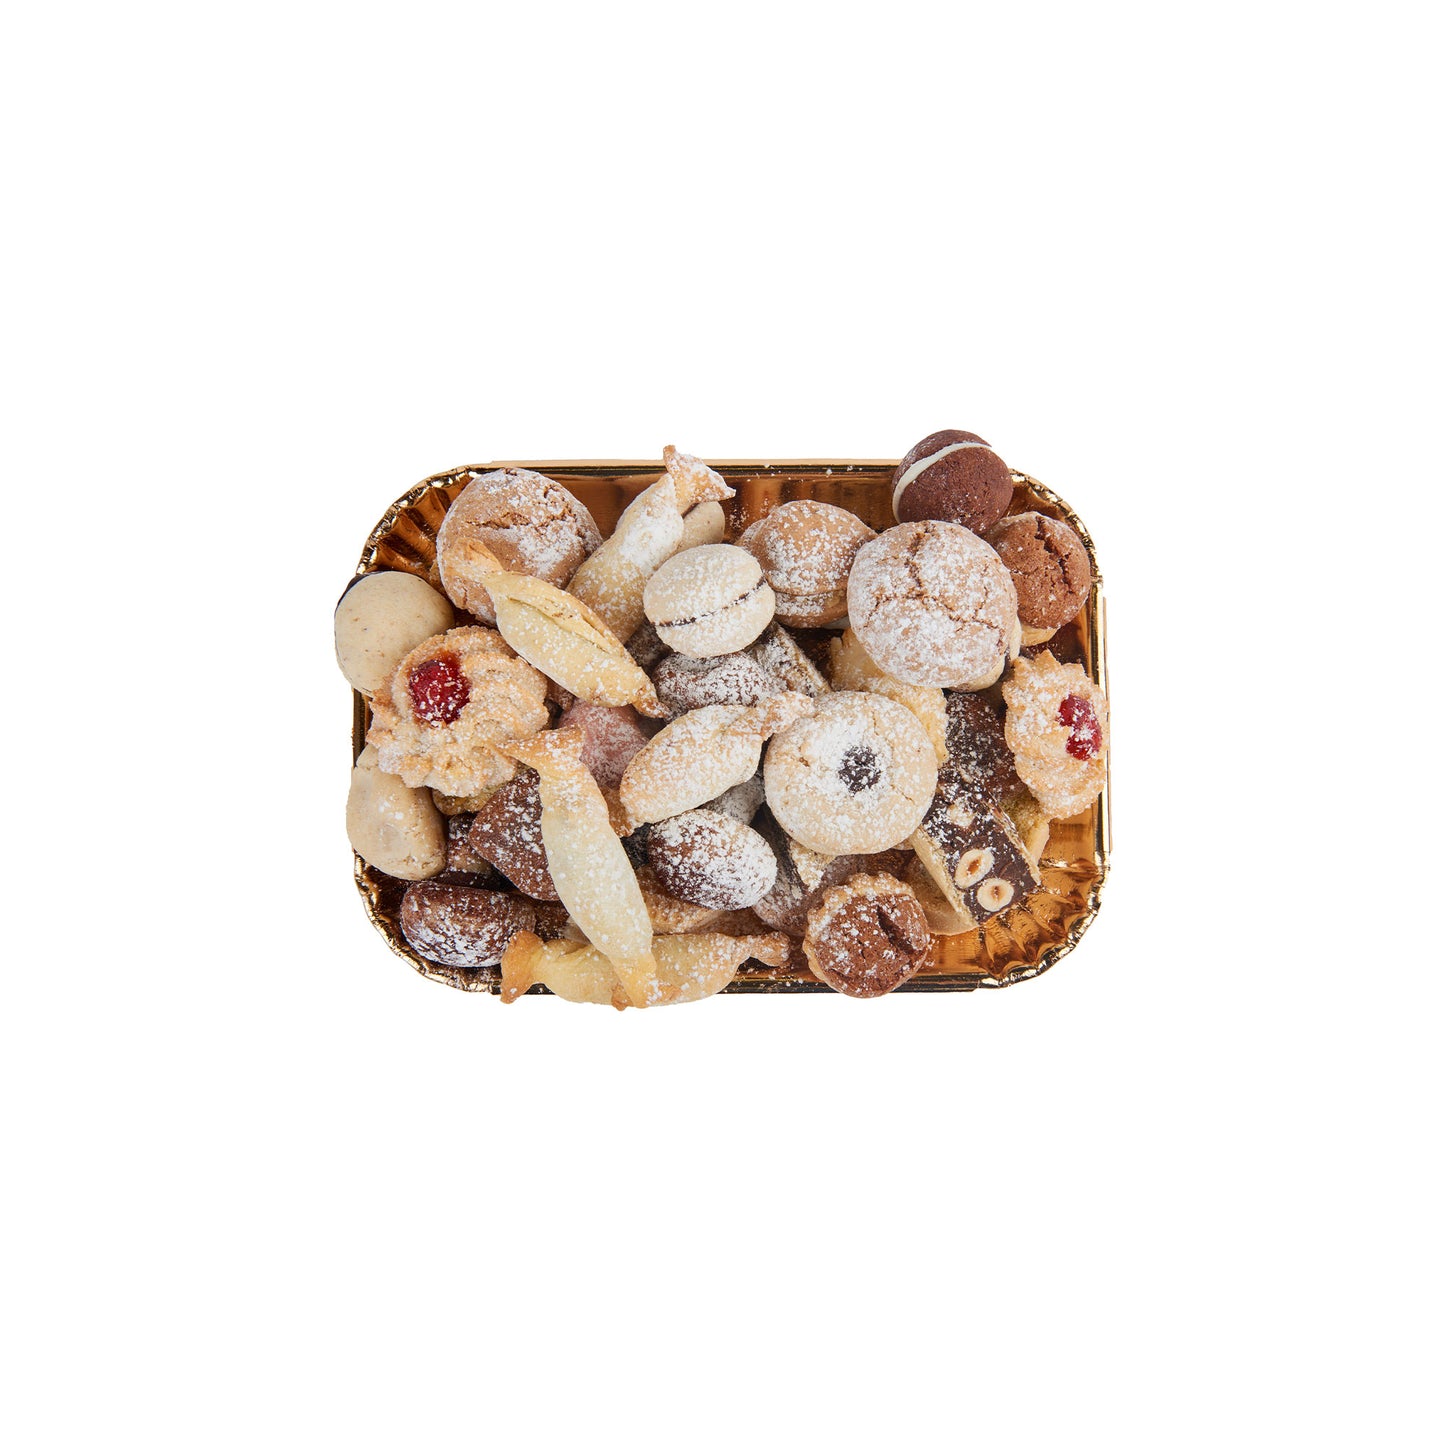 Gourmet Cookie Tray - 2lbs